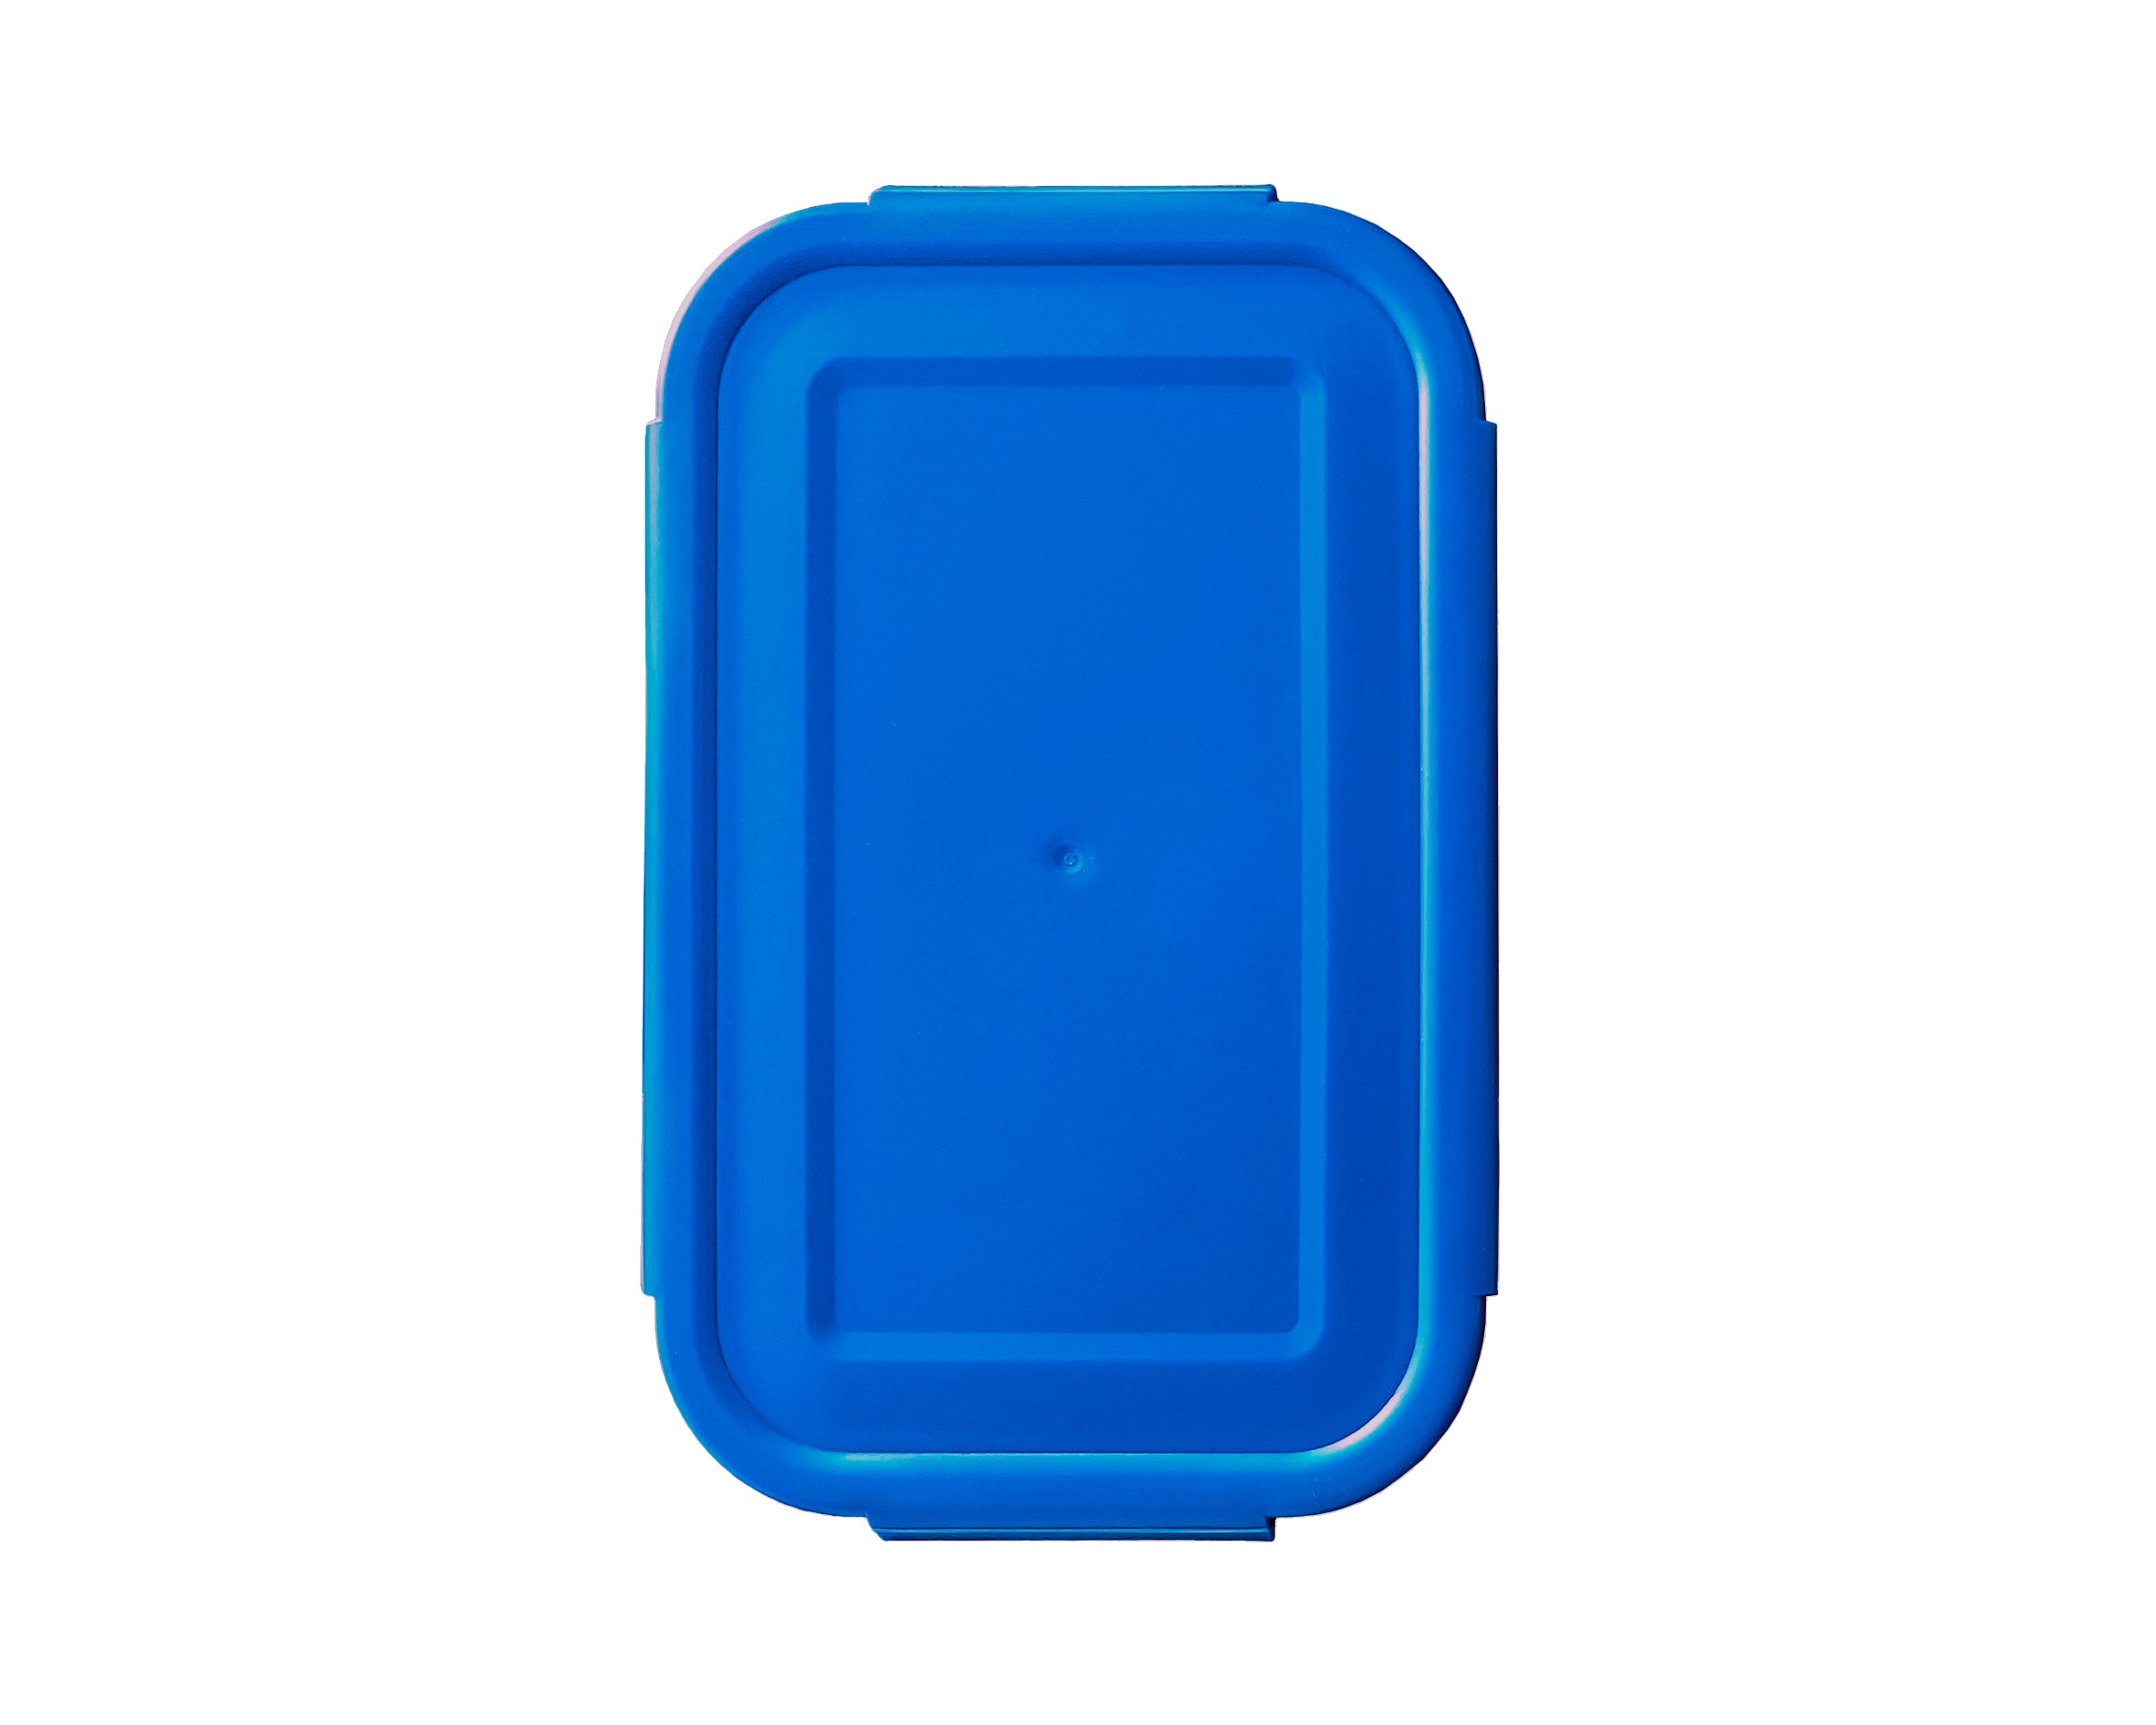 SBS-1000 On Balance The ORIGINAL Silicone Bowl Scale - Blue 1000g x 0.1g